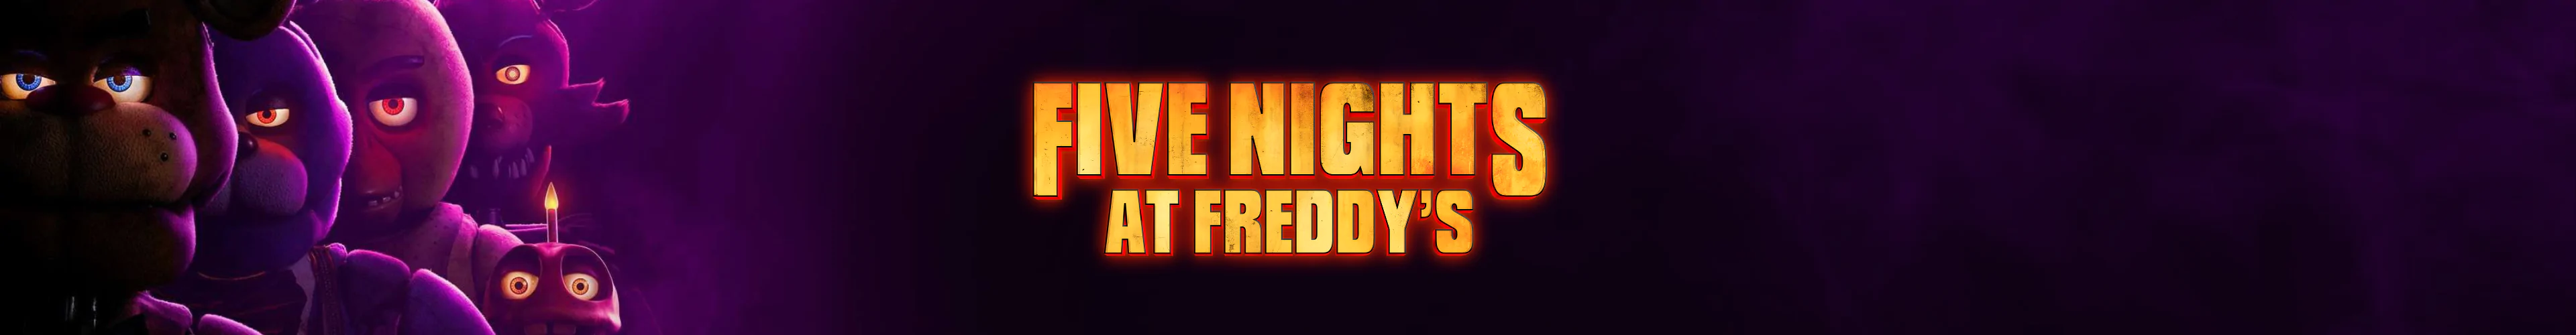 Five Nights at Freddy's plushes banner